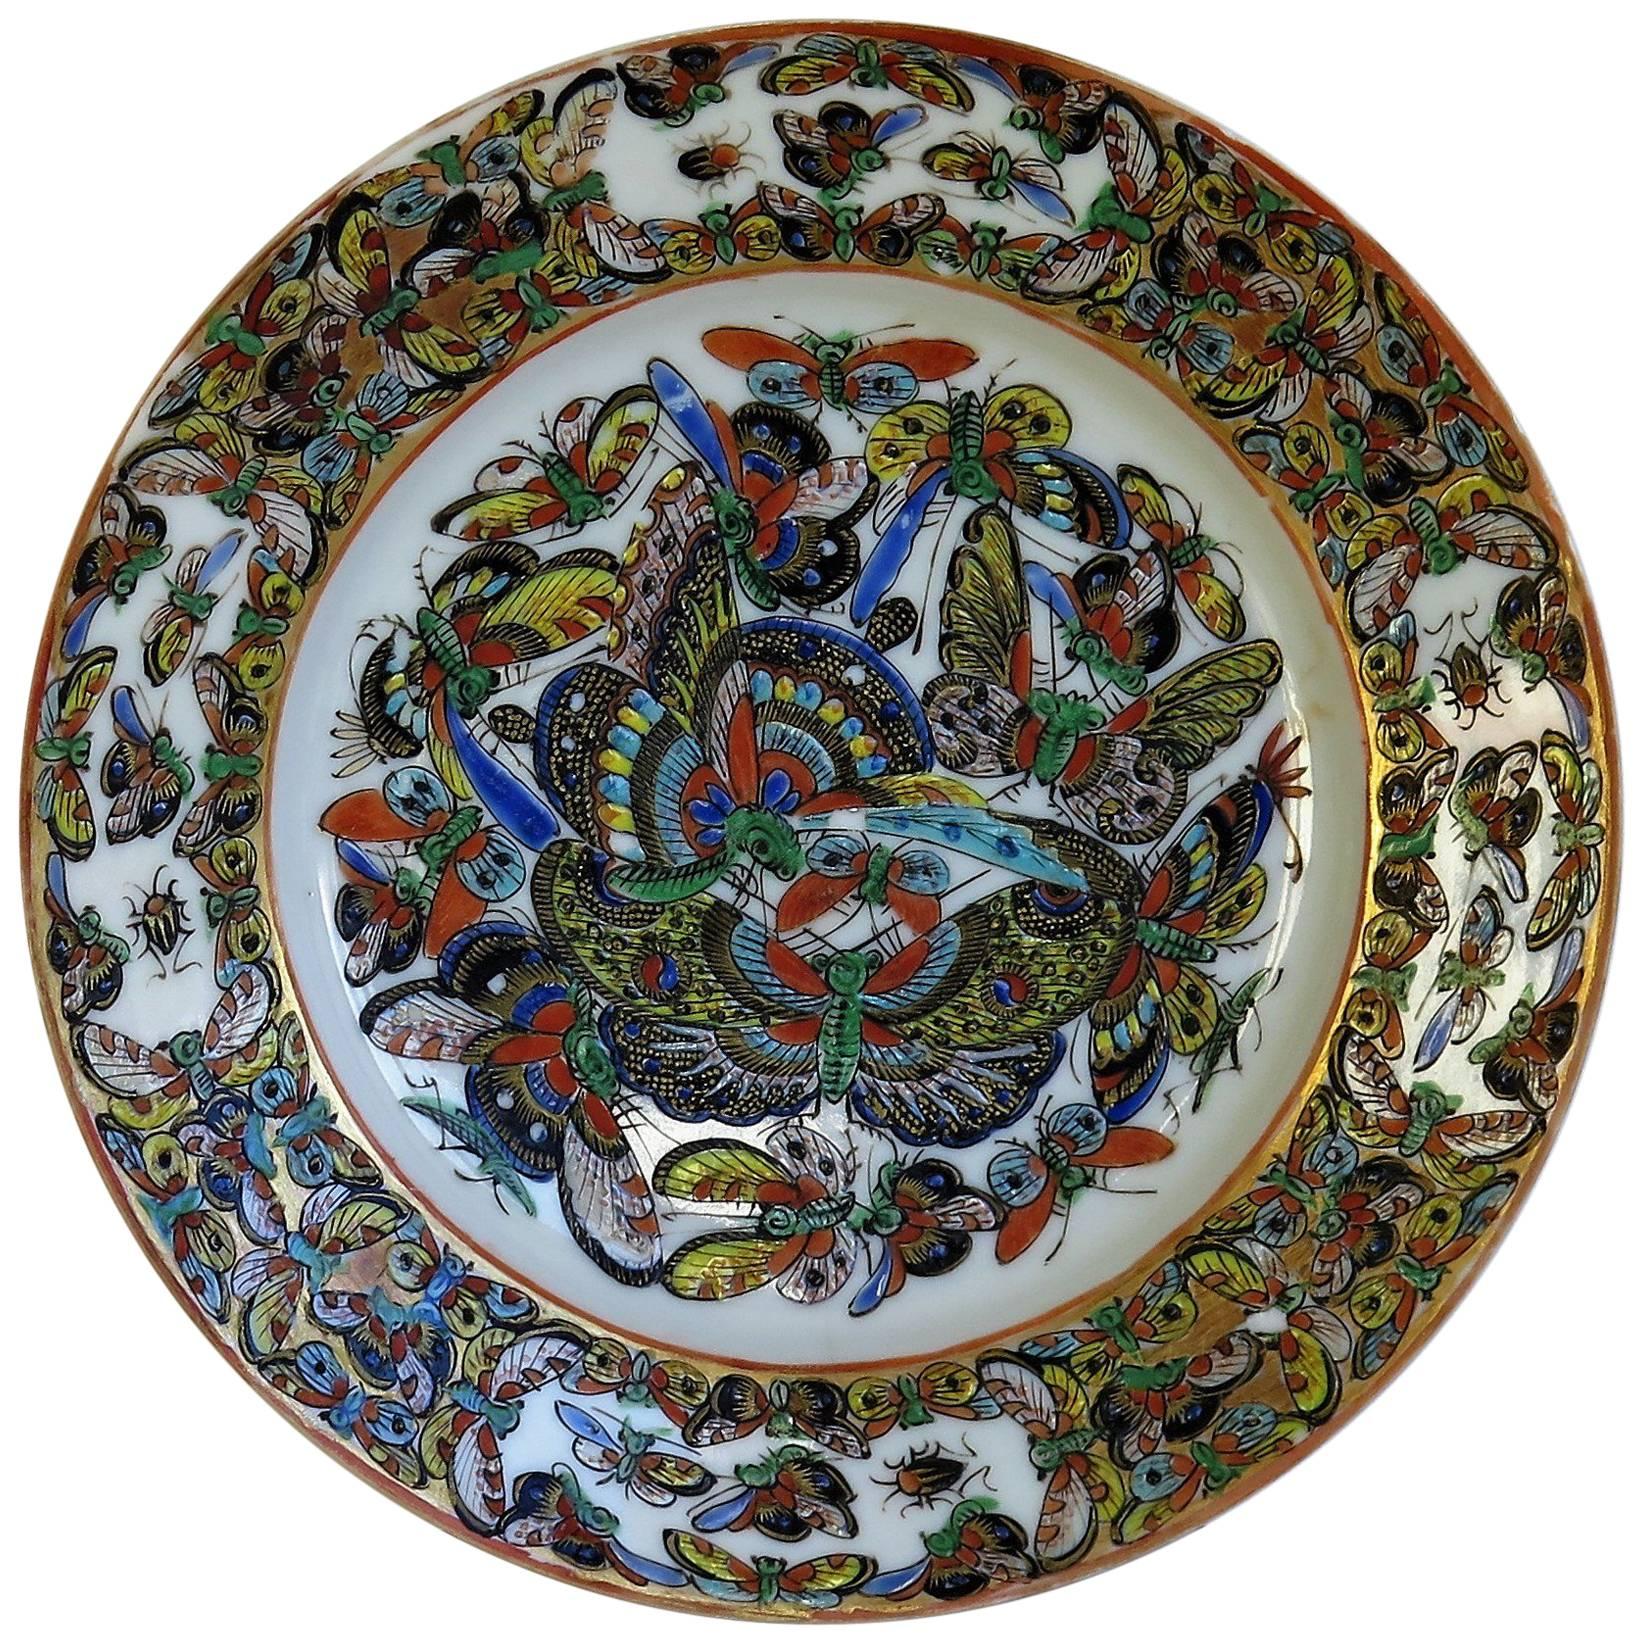 Chinese Export Porcelain Plate Butterfly Pattern, Qing Early 19th Century